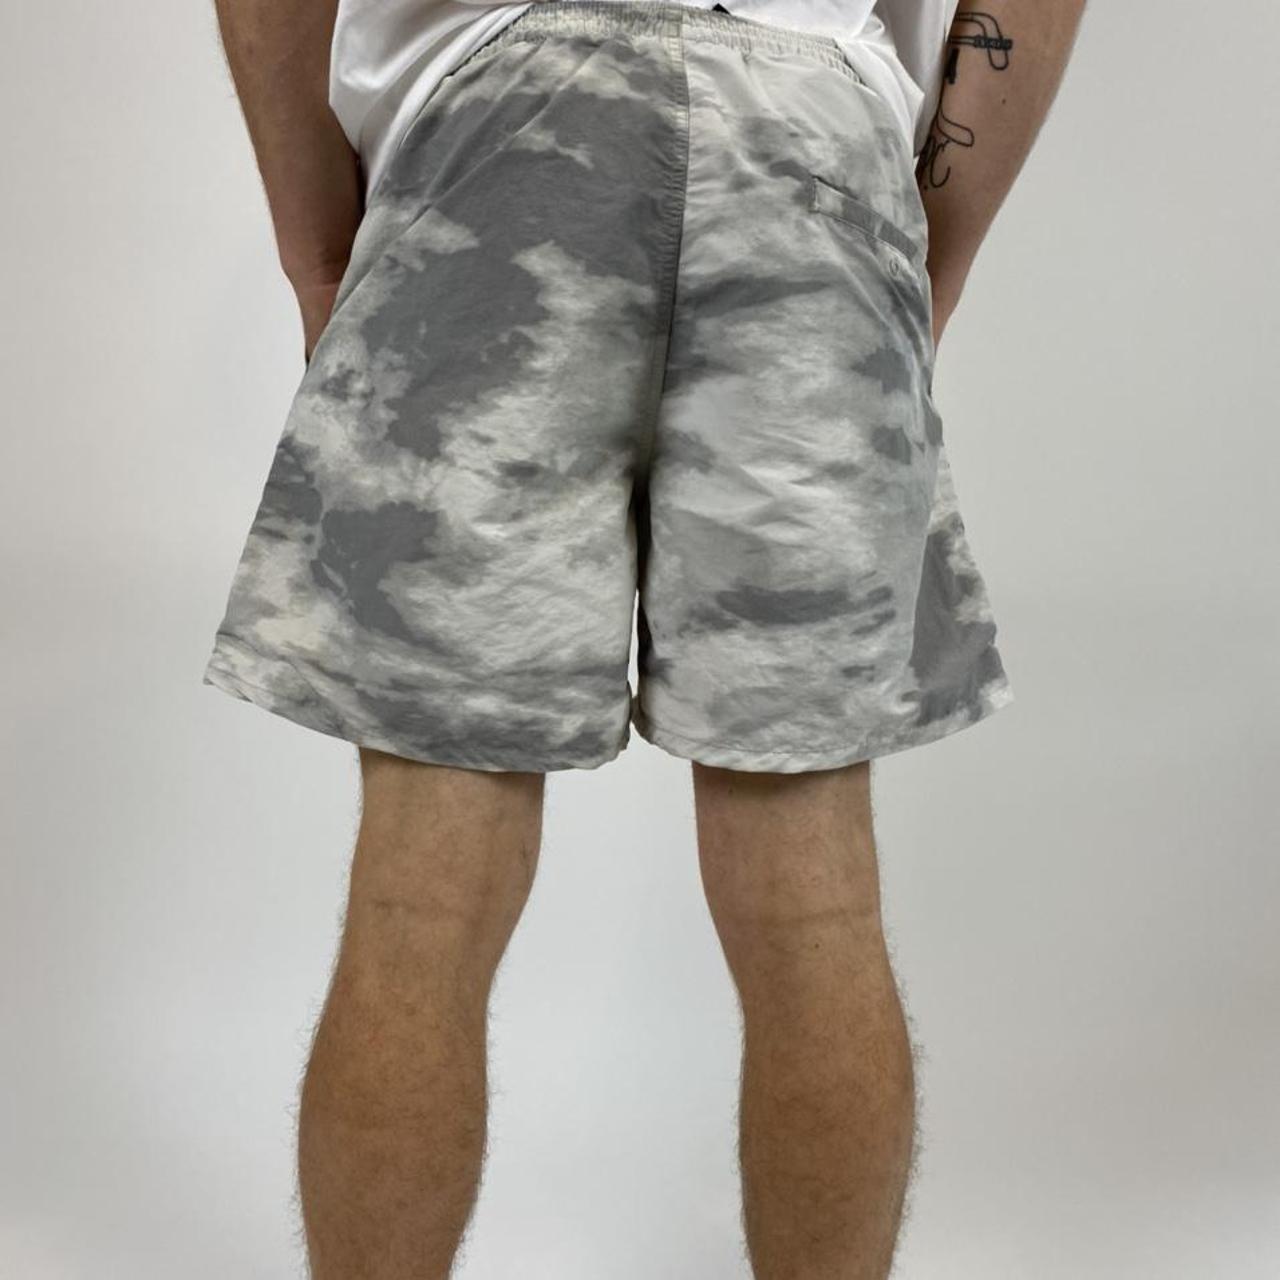 Travis Scott trails shorts, Love the cloudy marble...